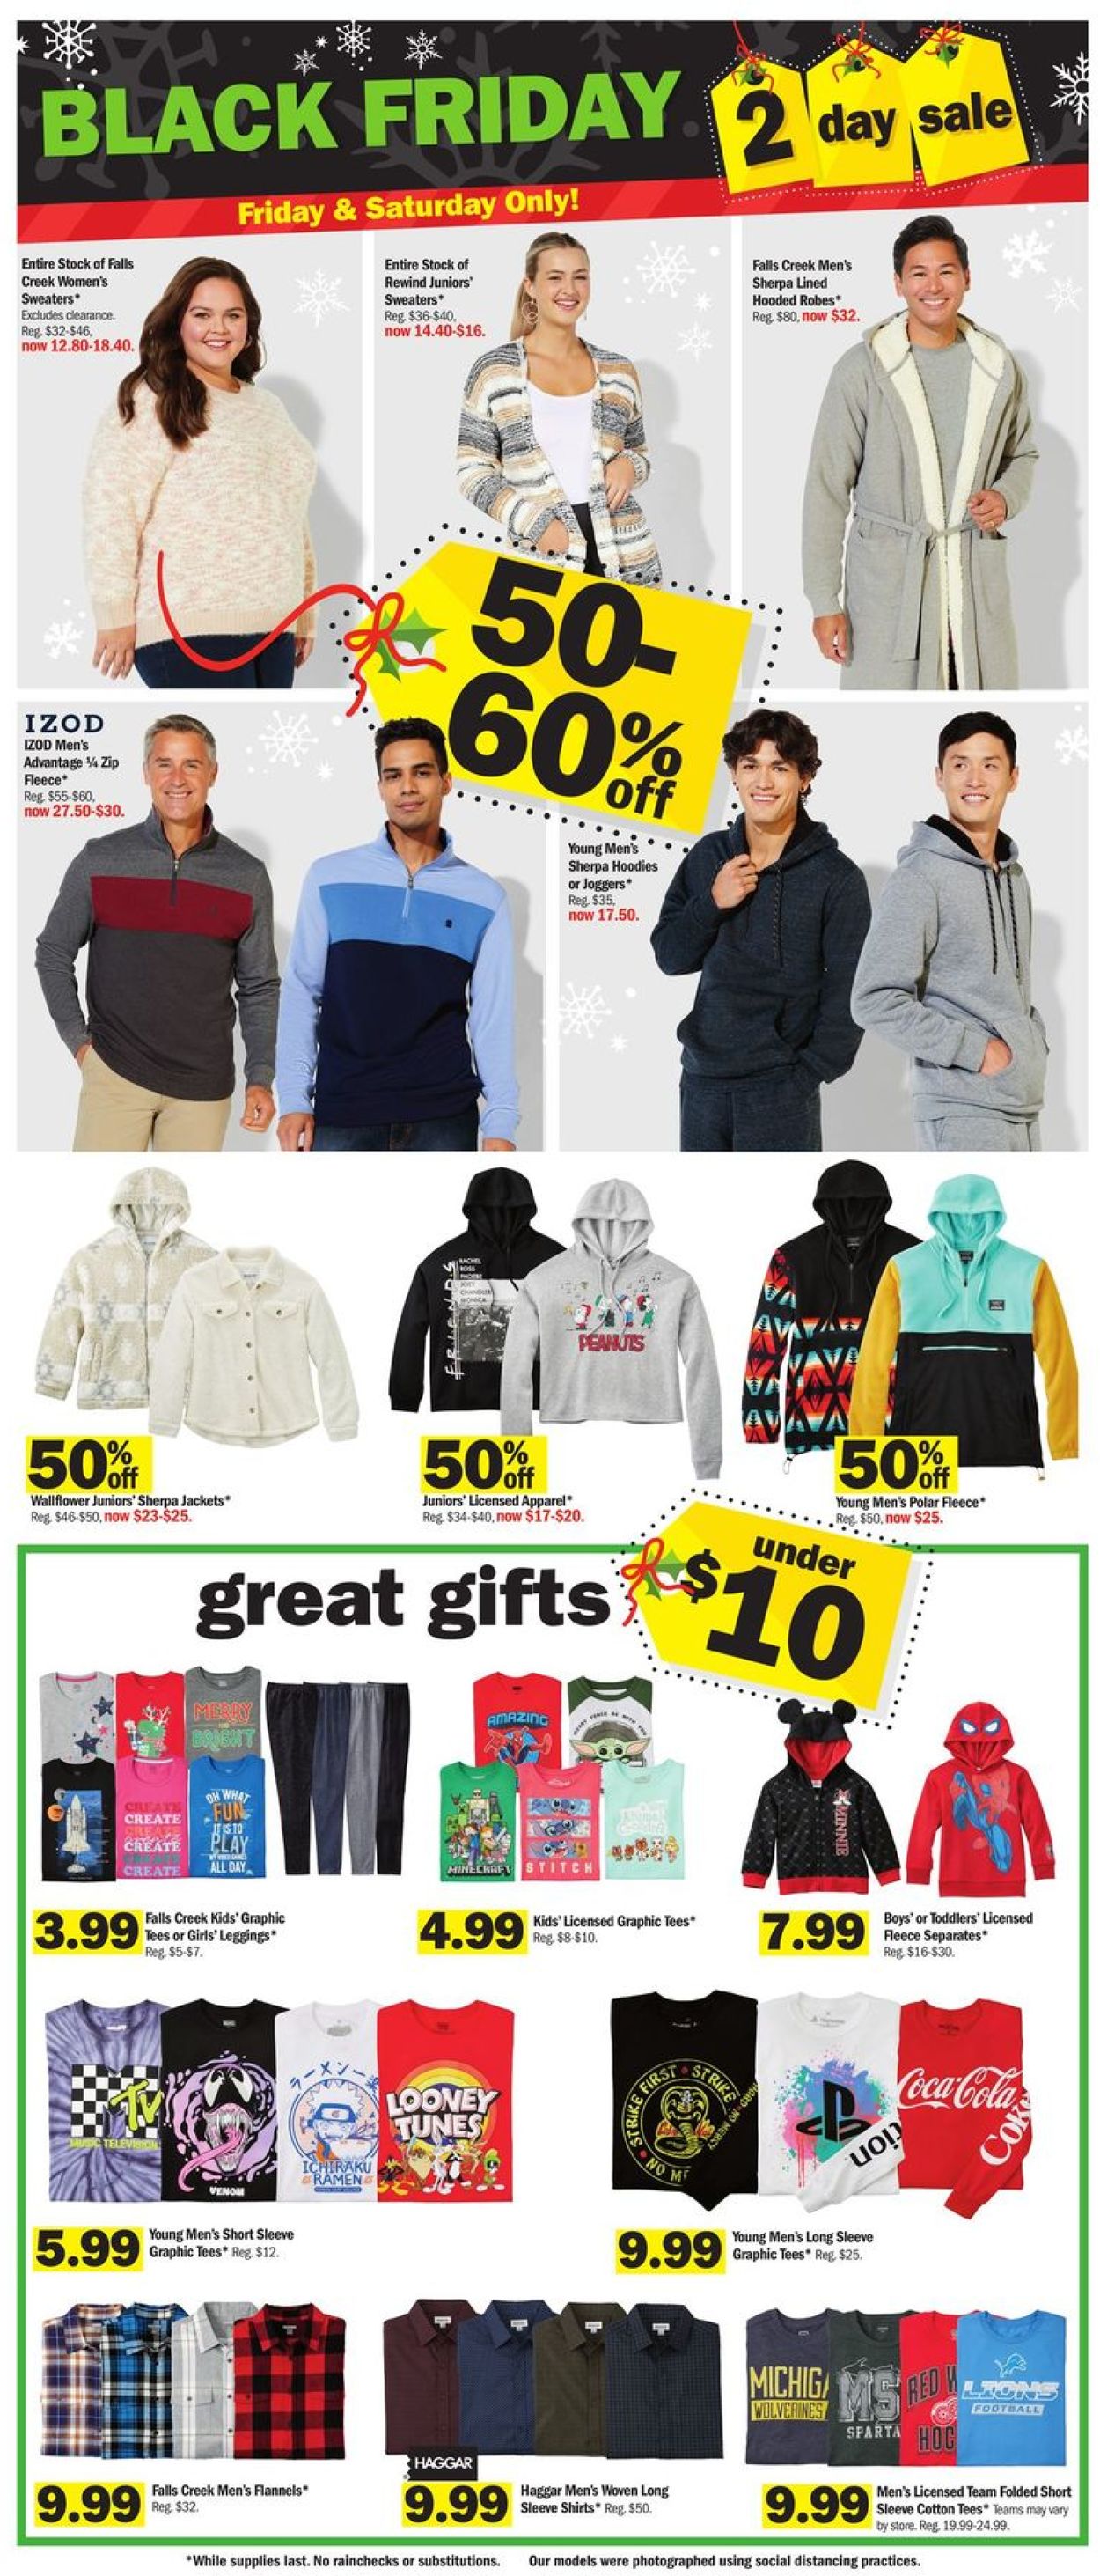 Catalogue Meijer BLACK FRIDAY AD 2021 from 11/26/2021